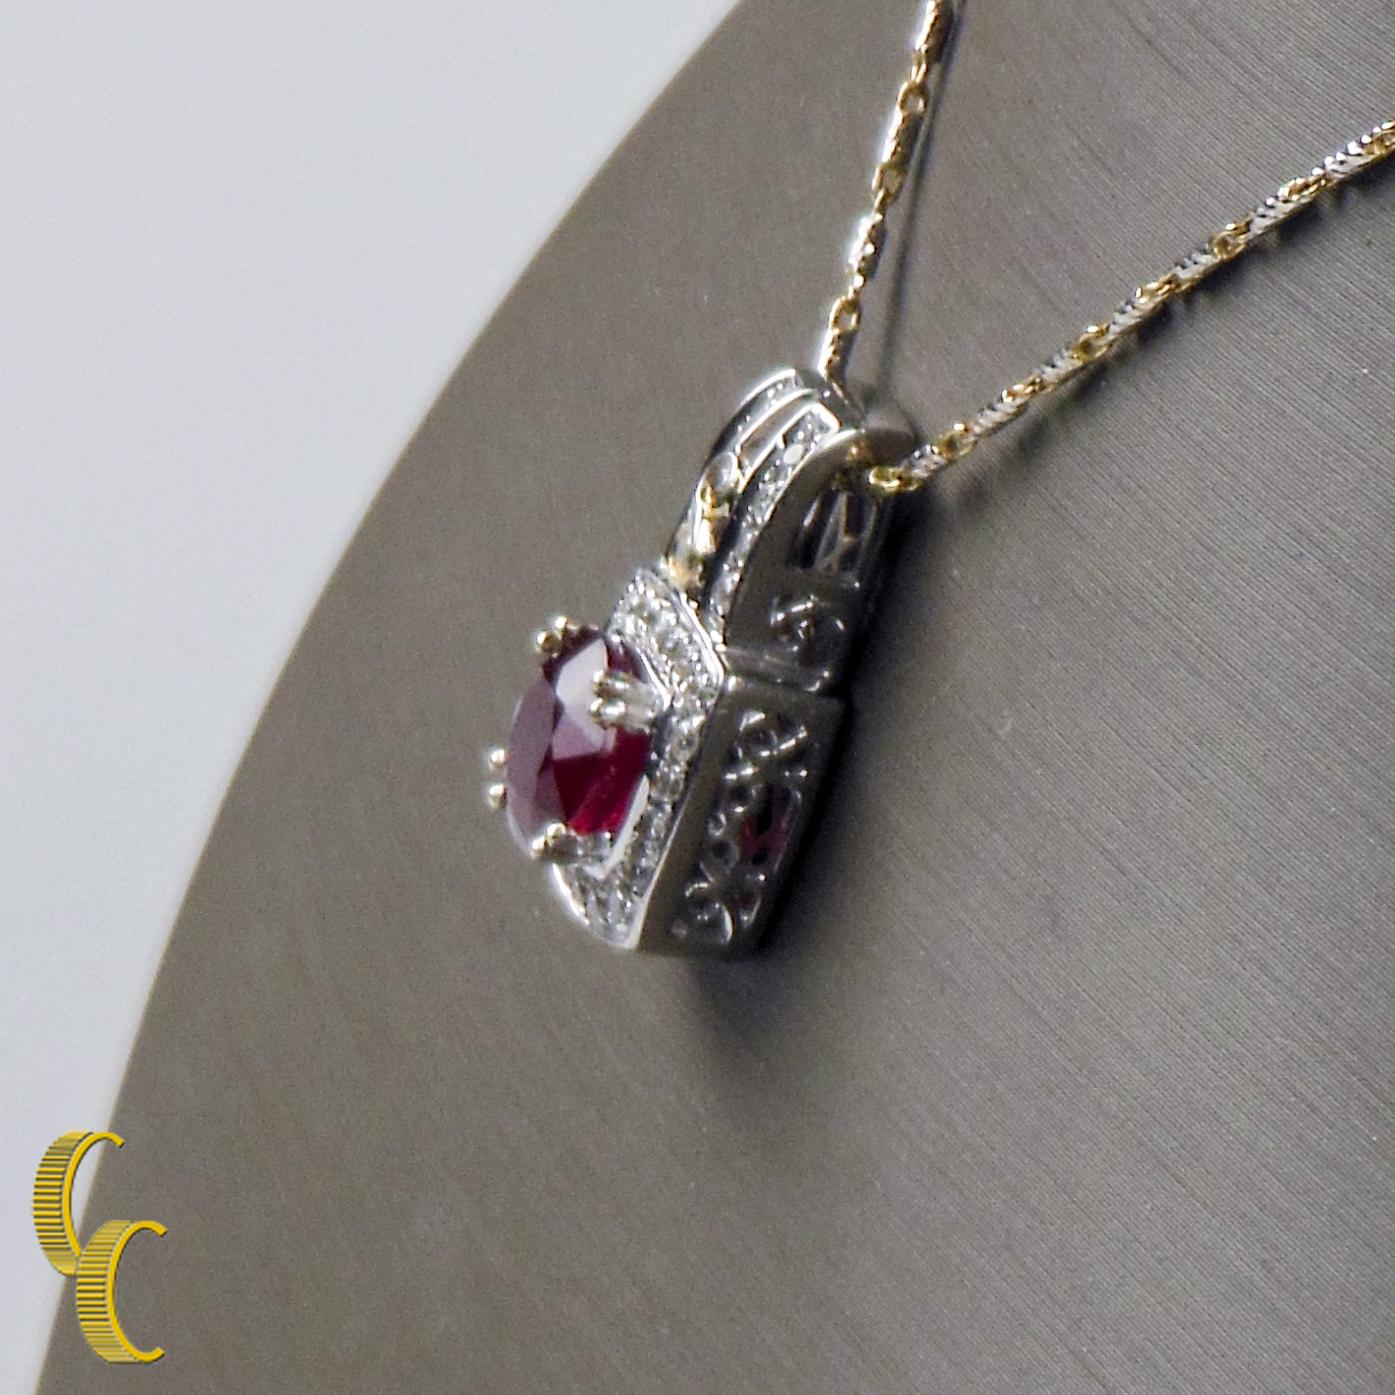 Round Cut 2.61 Carat Ruby and Diamond Pendant 14 Karat White Gold with Two-Tone Chain